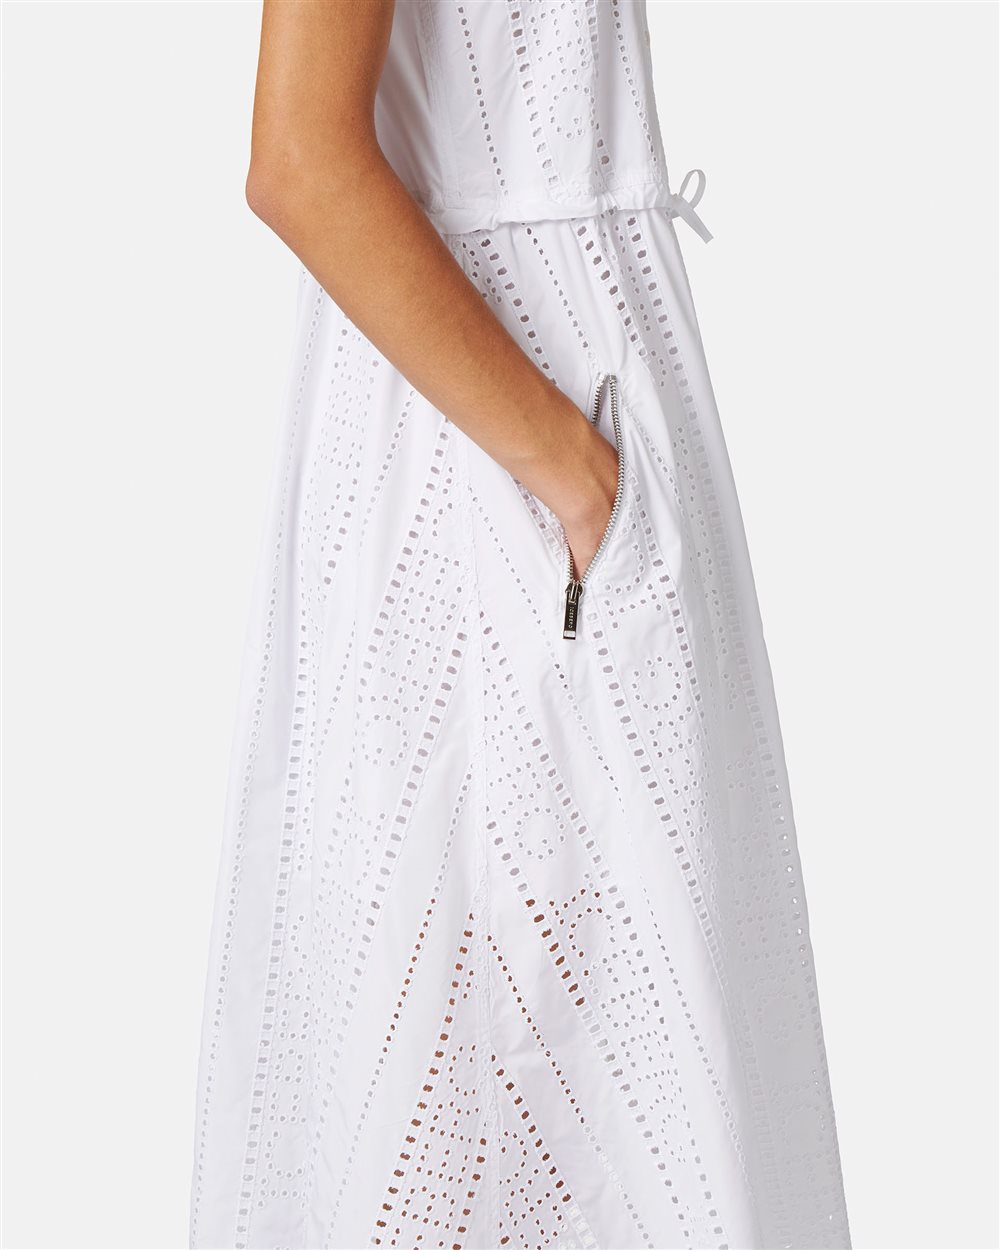 Broderie anglaise dress with logo - Iceberg - Official Website